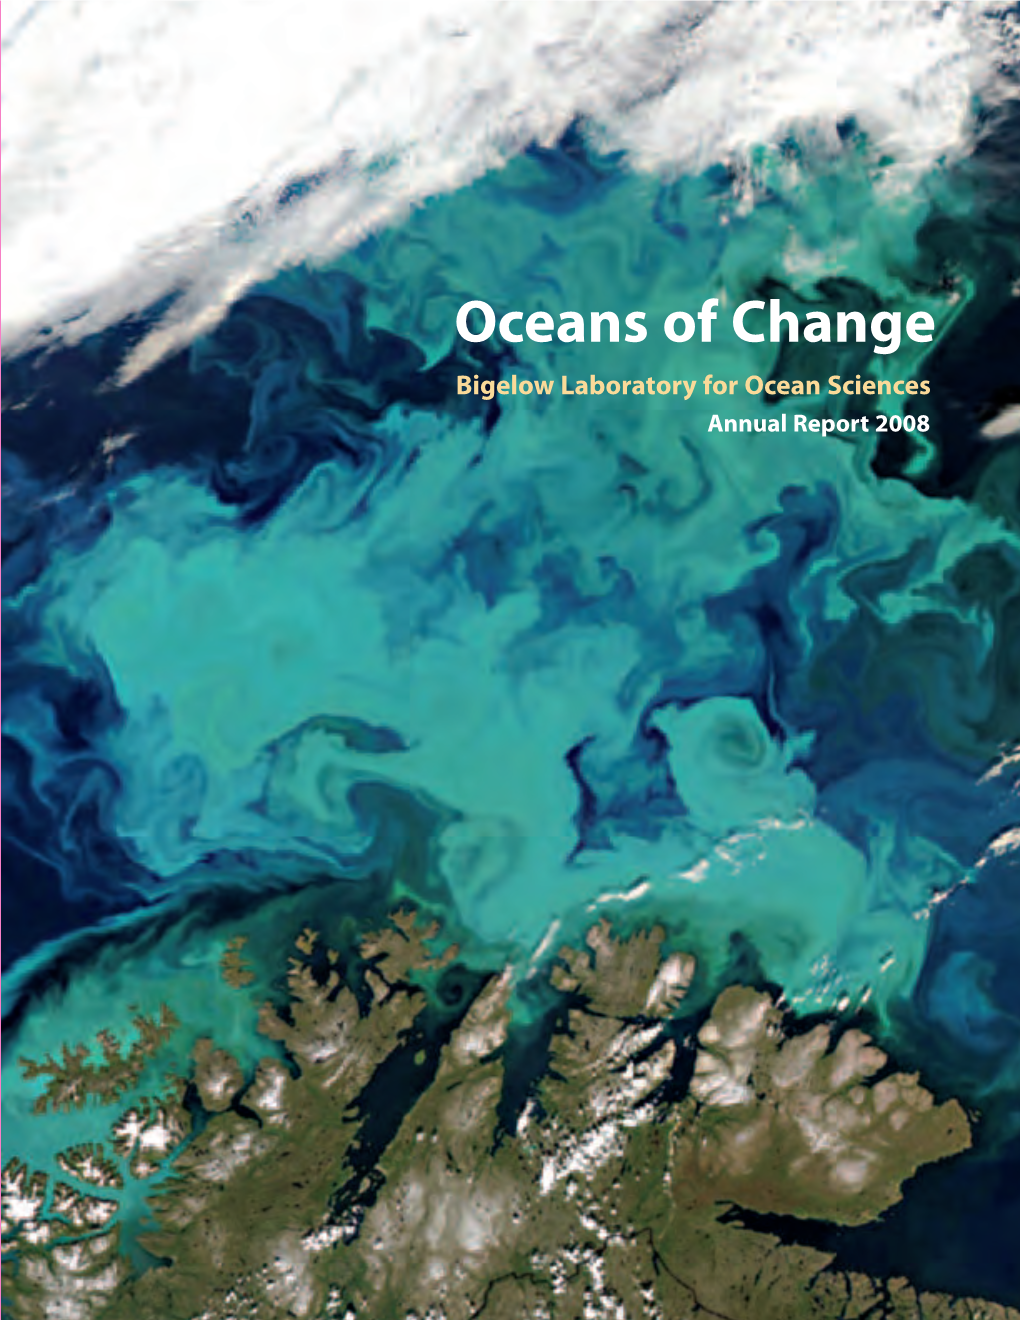 Oceans of Change Bigelow Laboratory for Ocean Sciences Annual Report 2008 “There Is No Finish Line in the Work of Science